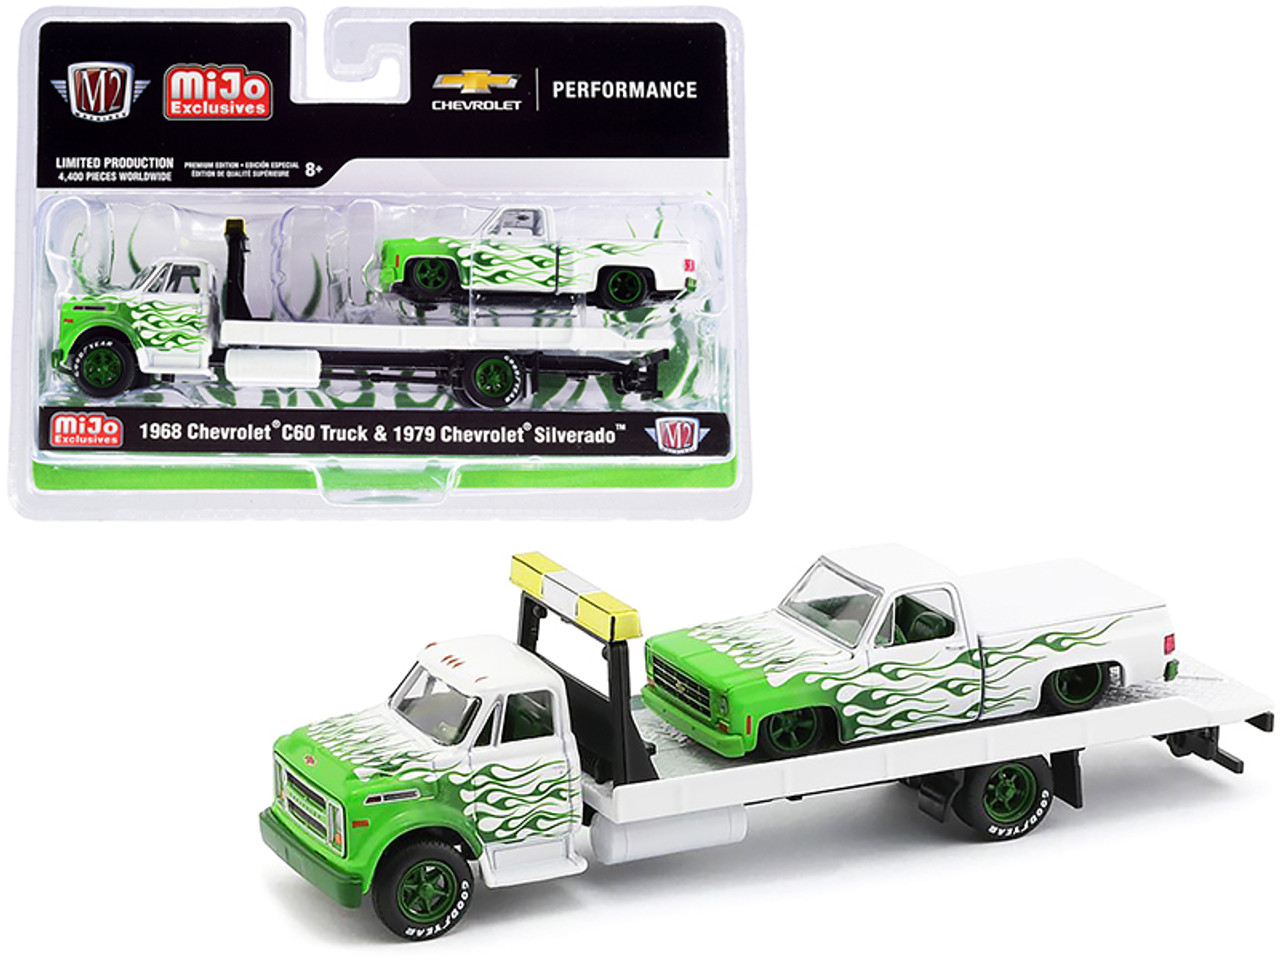 1968 Chevrolet C60 Flatbed Truck and 1979 Chevrolet Silverado Pickup Truck with Bed Cover White with Green Flames Limited Edition to 4400 pieces Worldwide 1/64 Diecast Models by M2 Machines